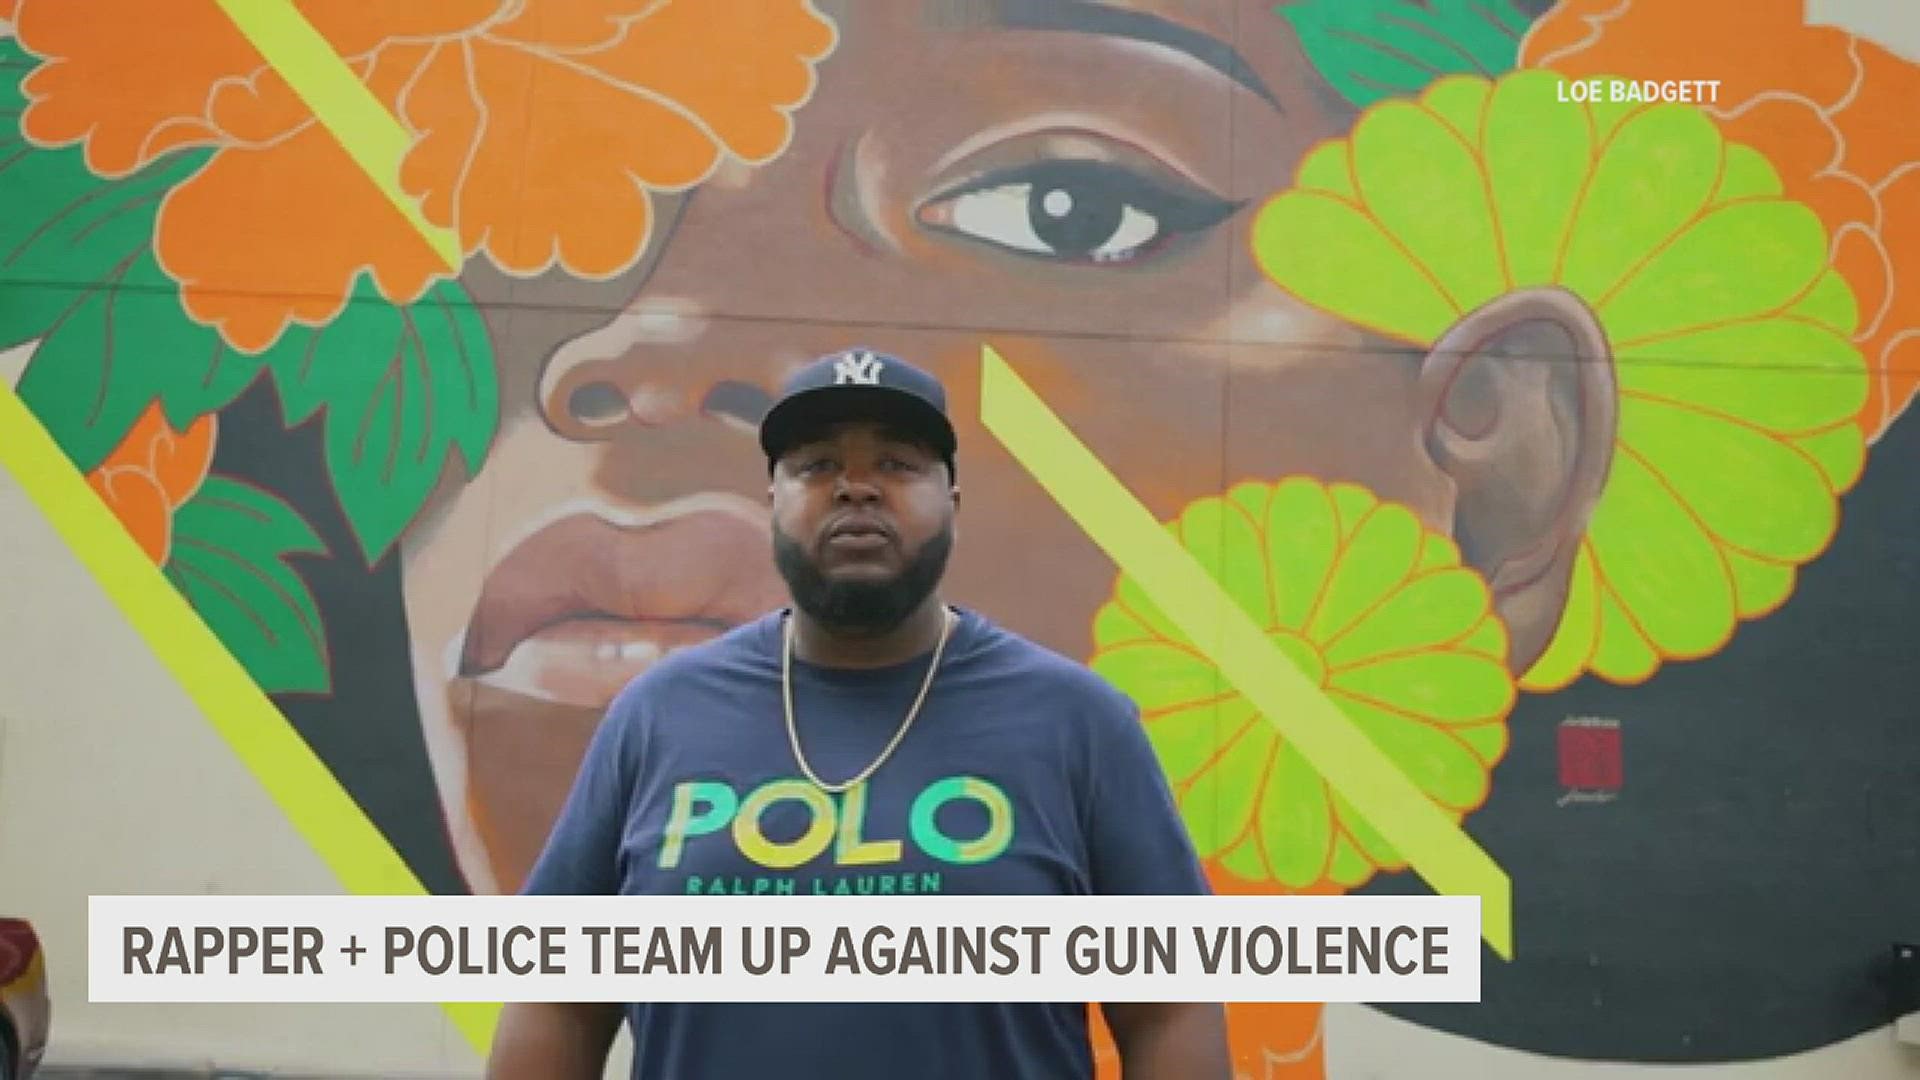 Two unlikely partners—a hip-hop artist and a police commissioner—teamed up this summer to spread a positive anti-violence message.